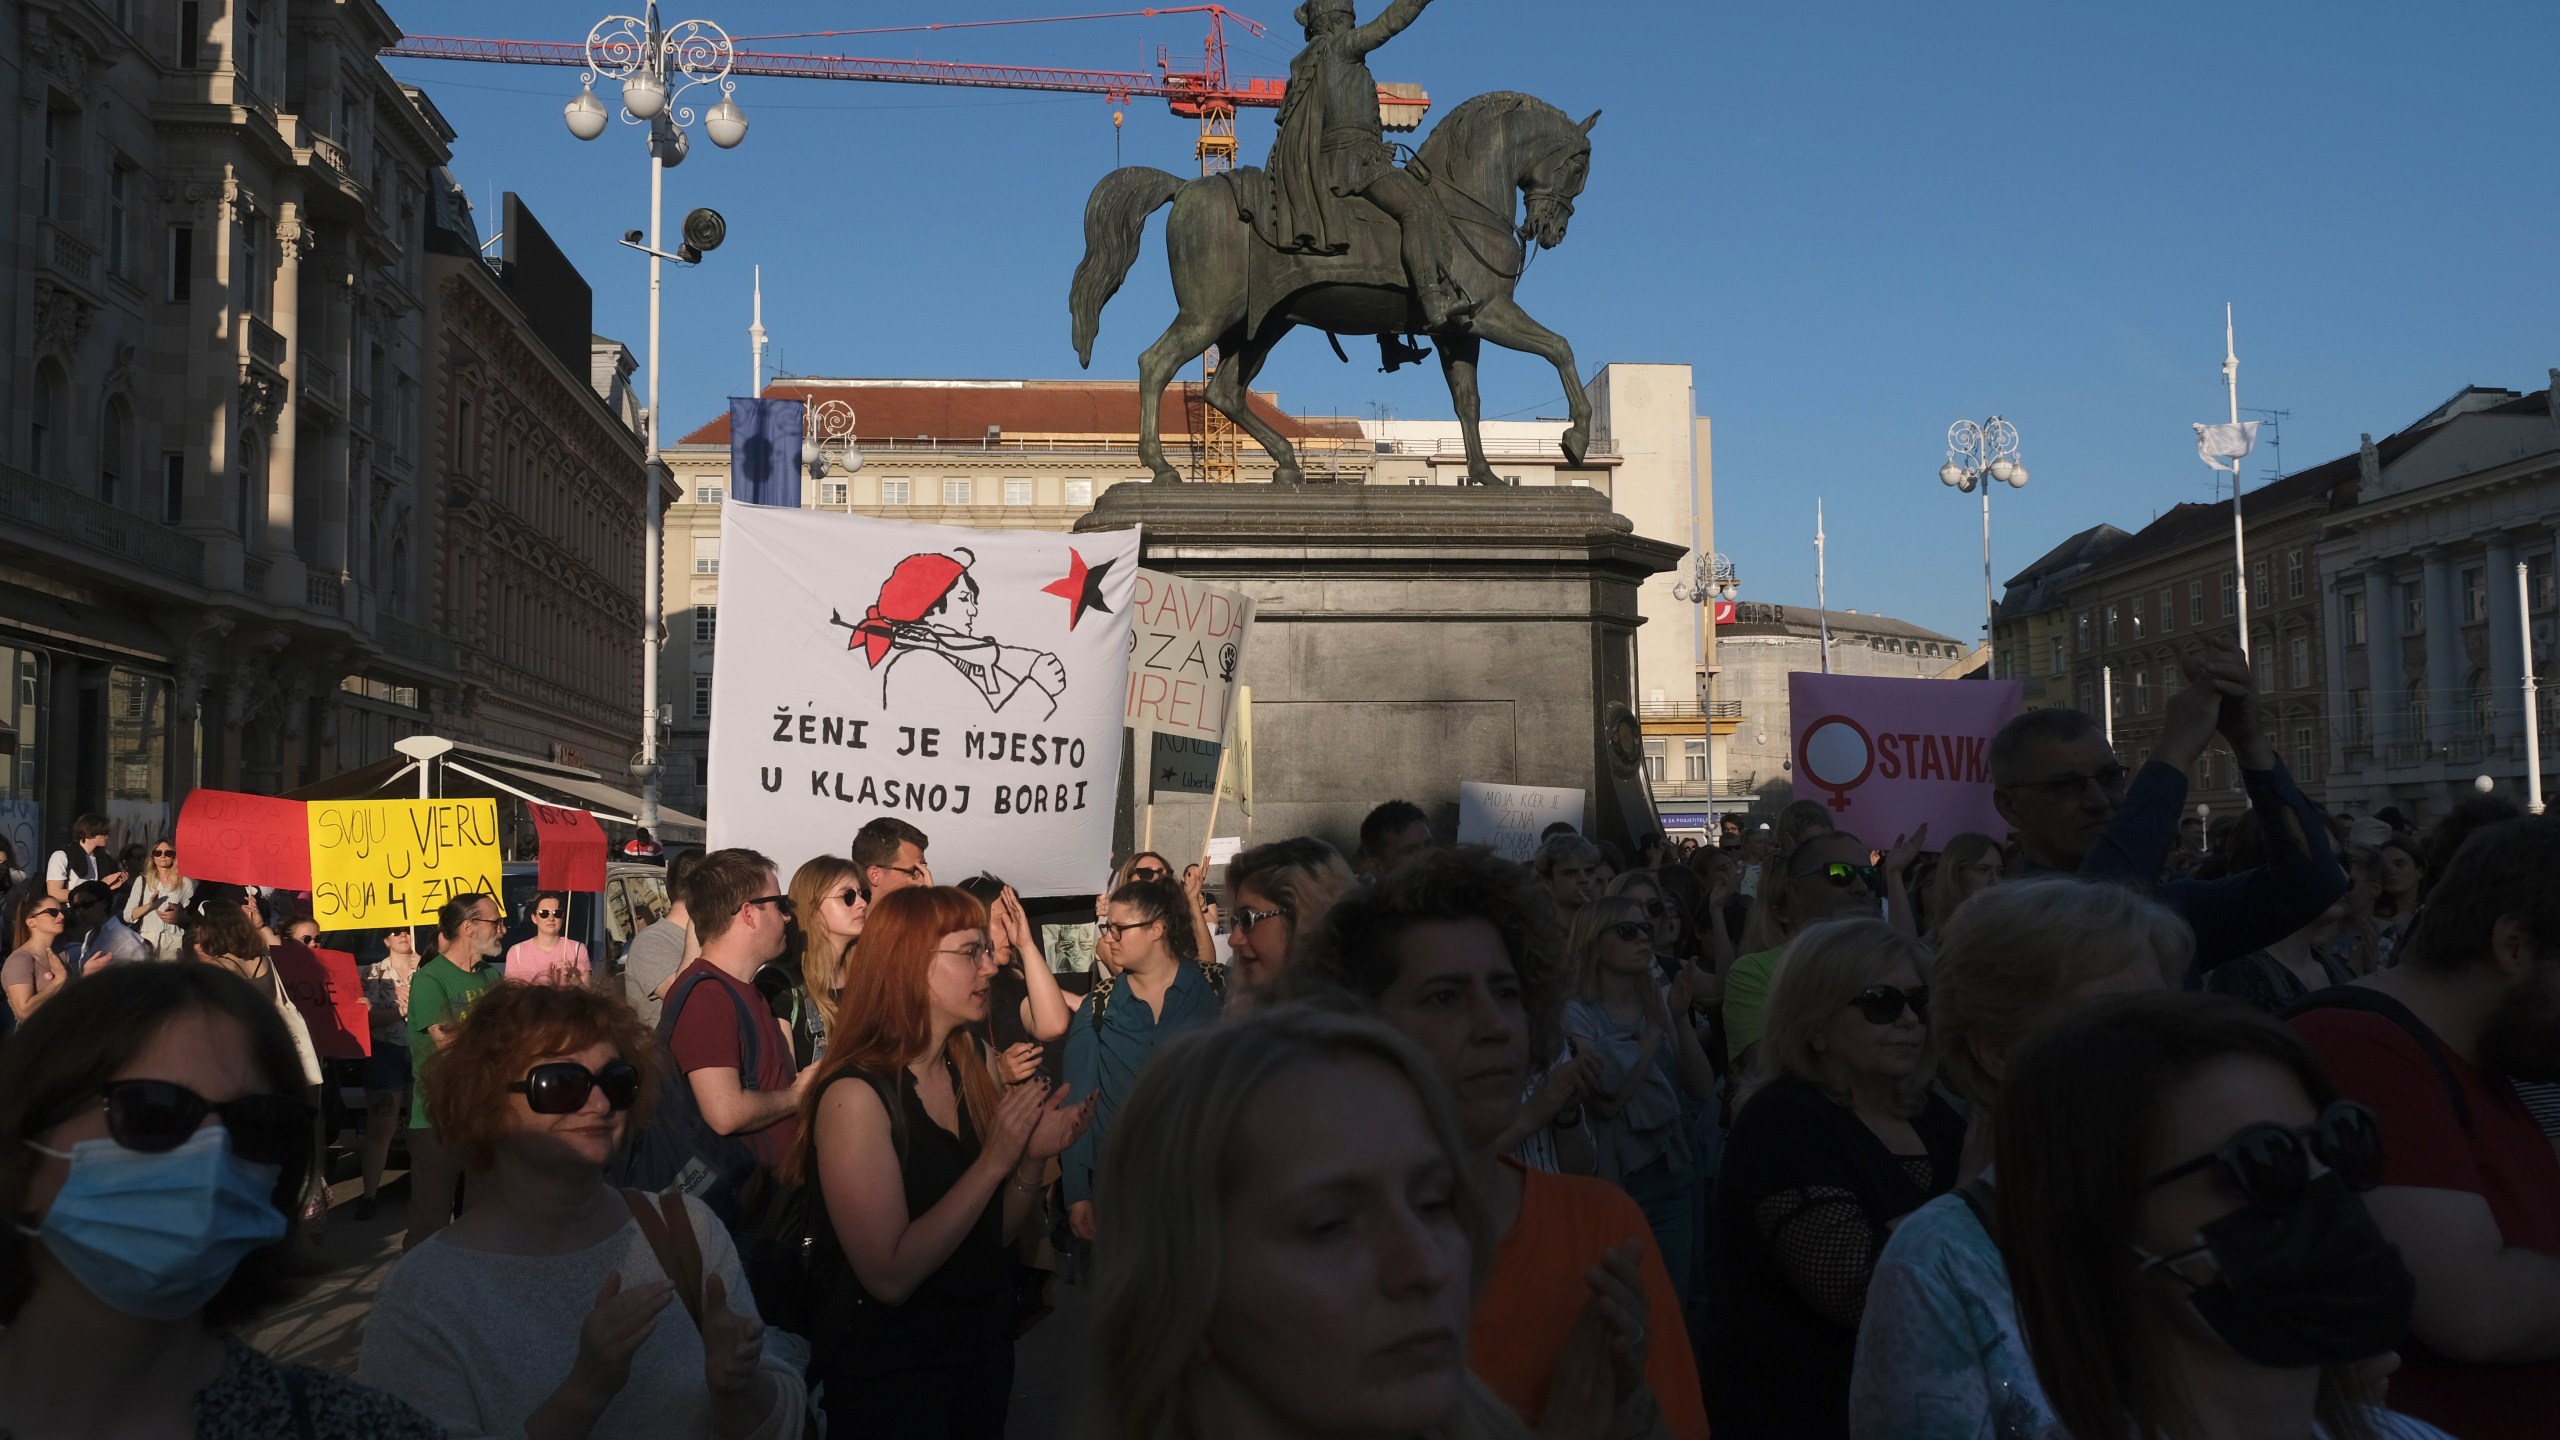 FILE - People attend a protest in solidarity with a woman who was denied an abortion despite her fetus having serious health problems, in Zagreb, Croatia, on May 12, 2022. In staunchly Catholic Croatia, influential conservative and religious groups have tried to get abortion banned but with no success. However, many doctors refuse to terminate pregnancies, forcing Croatian women to travel to neighboring countries for the procedure. (AP Photo, File)